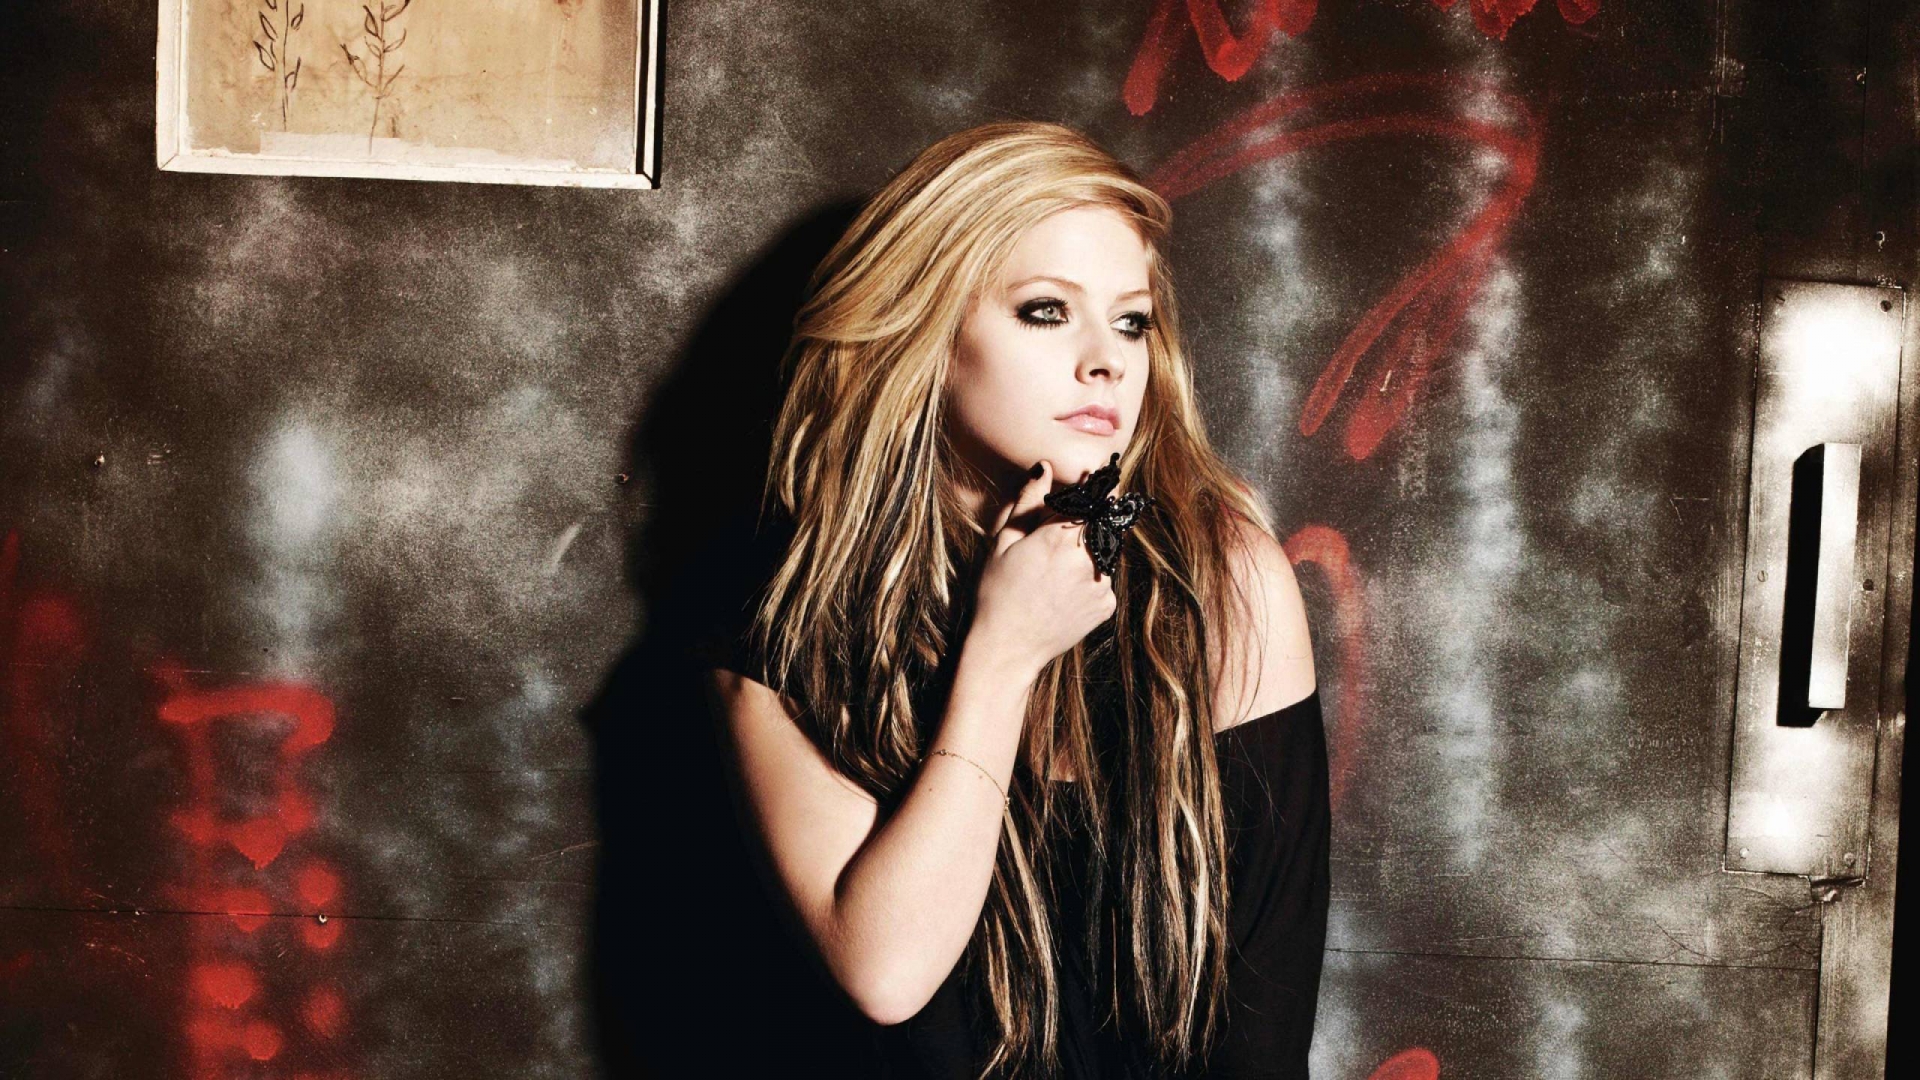 Avril Lavigne Butterfly for 1920 x 1080 HDTV 1080p resolution